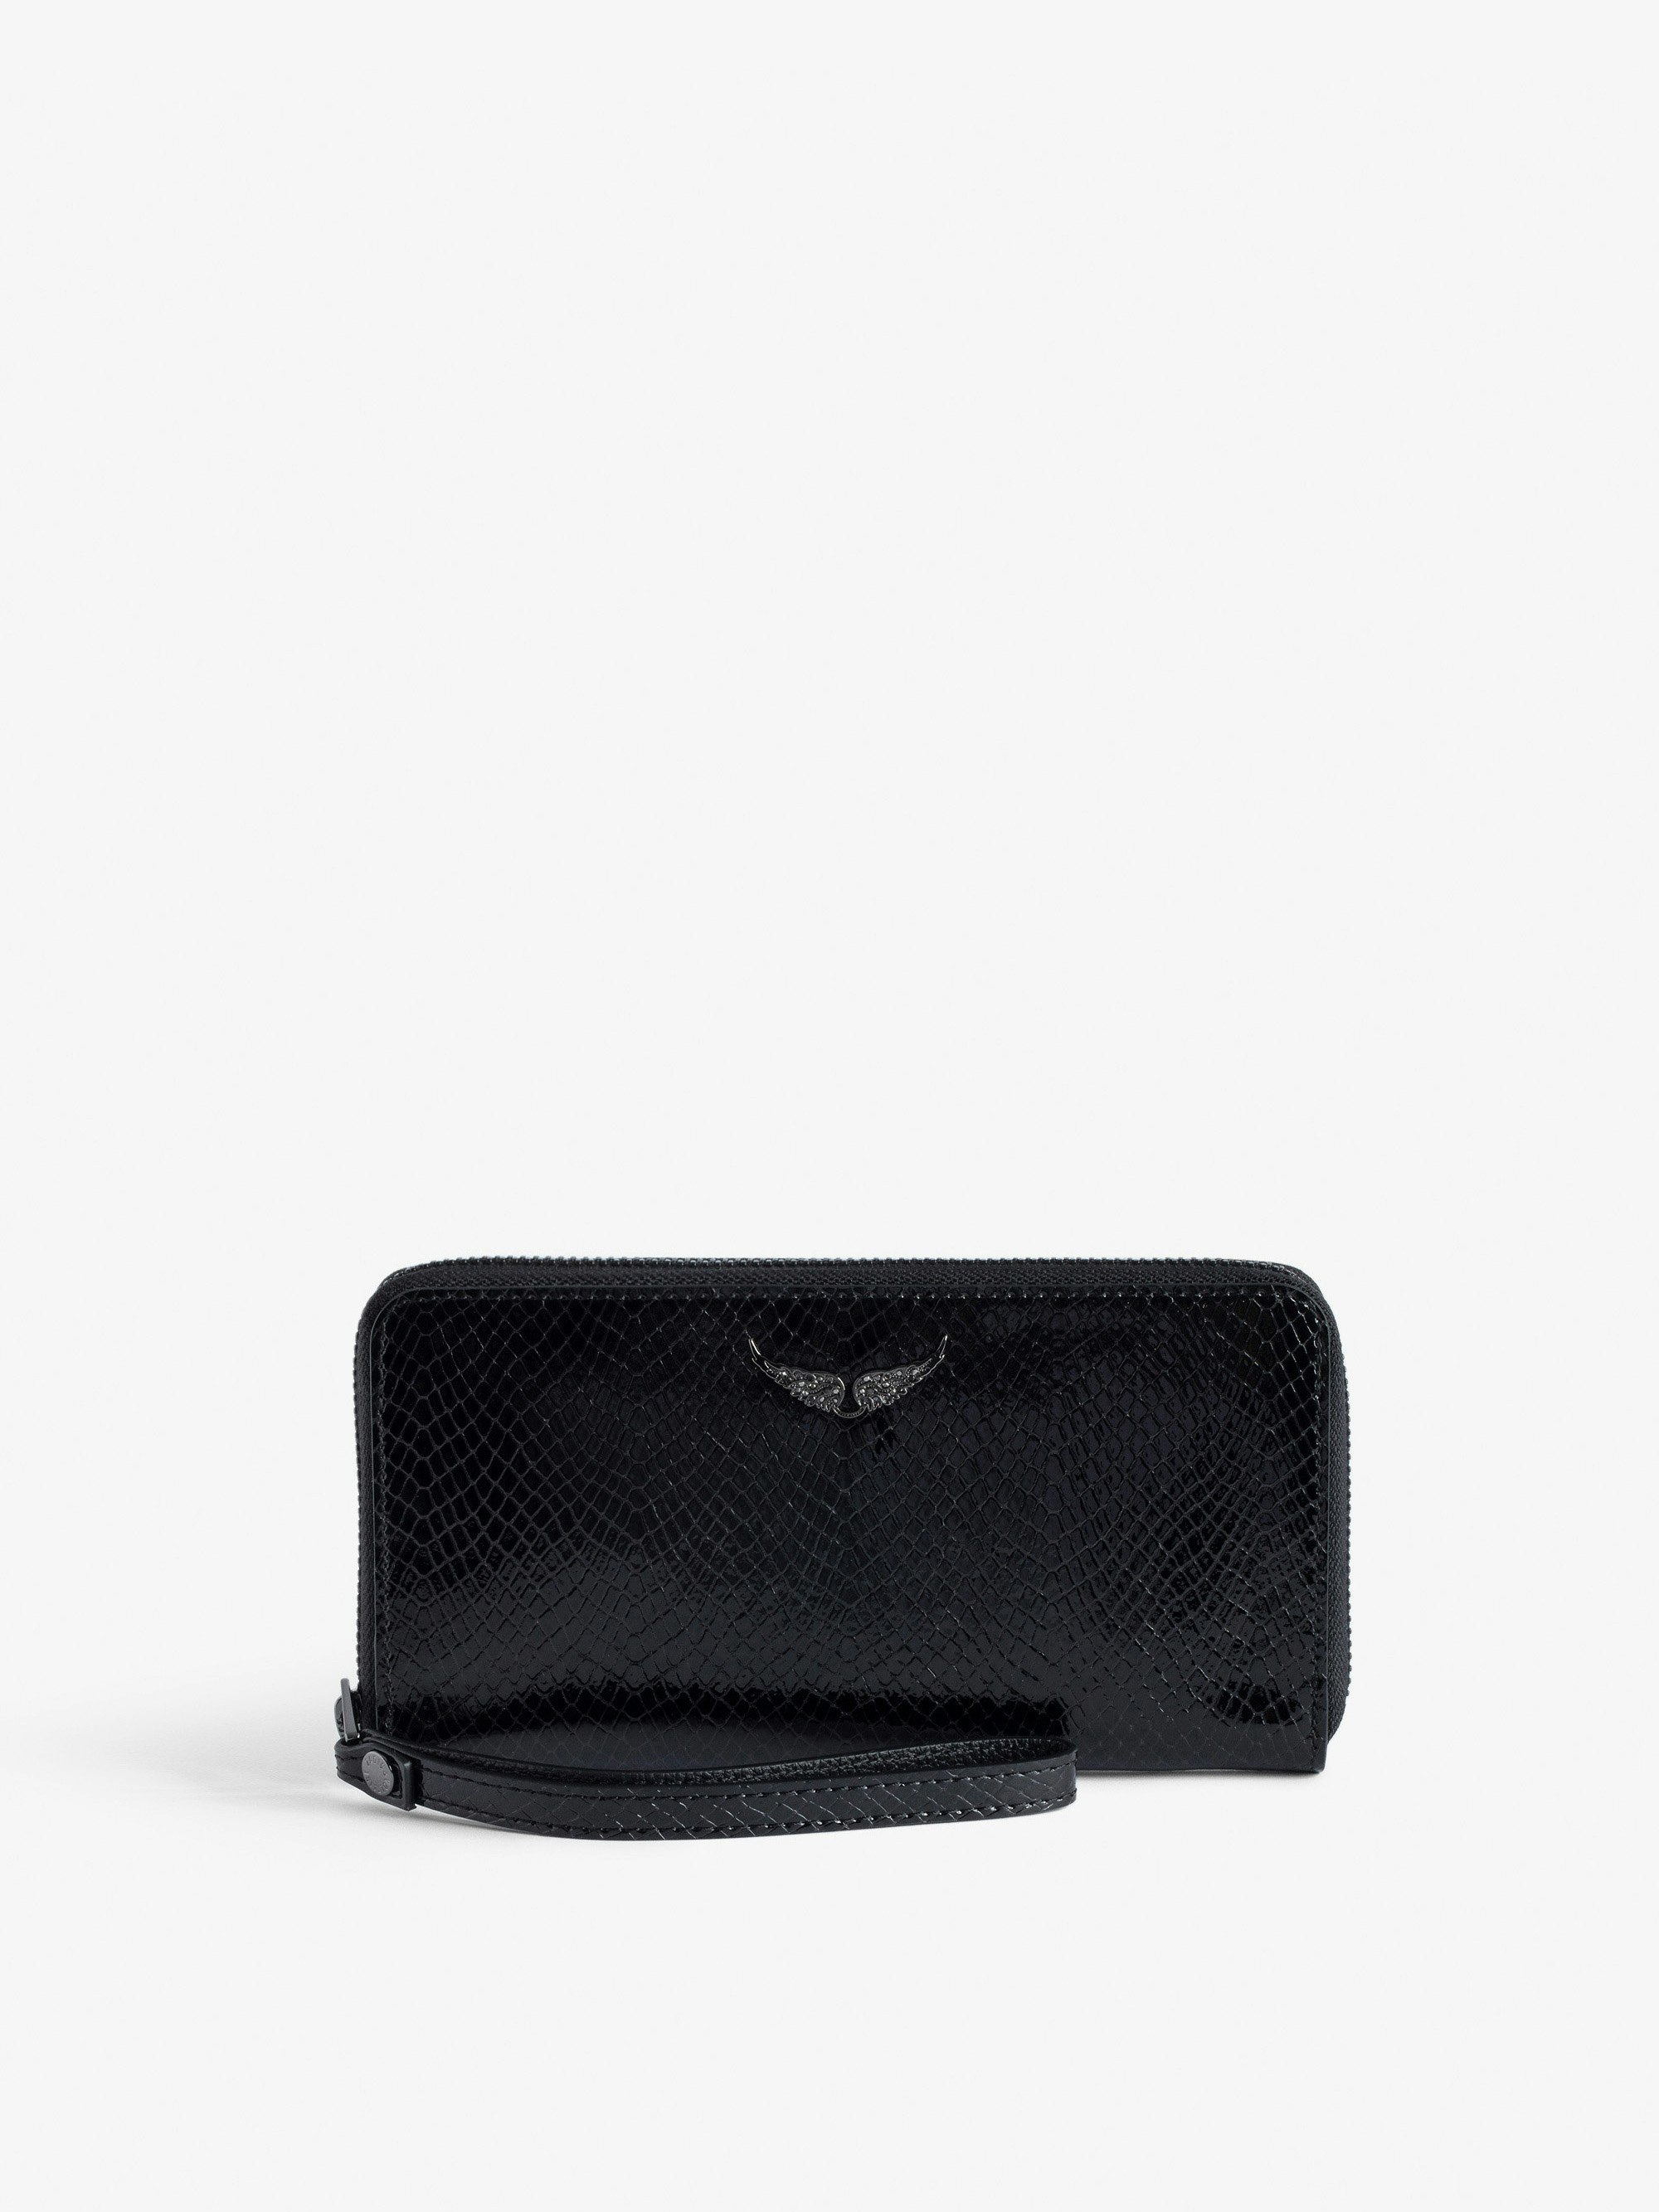 Compagnon Glossy Wild Embossed Wallet - Women’s black python-effect patent leather wallet with wings charm.